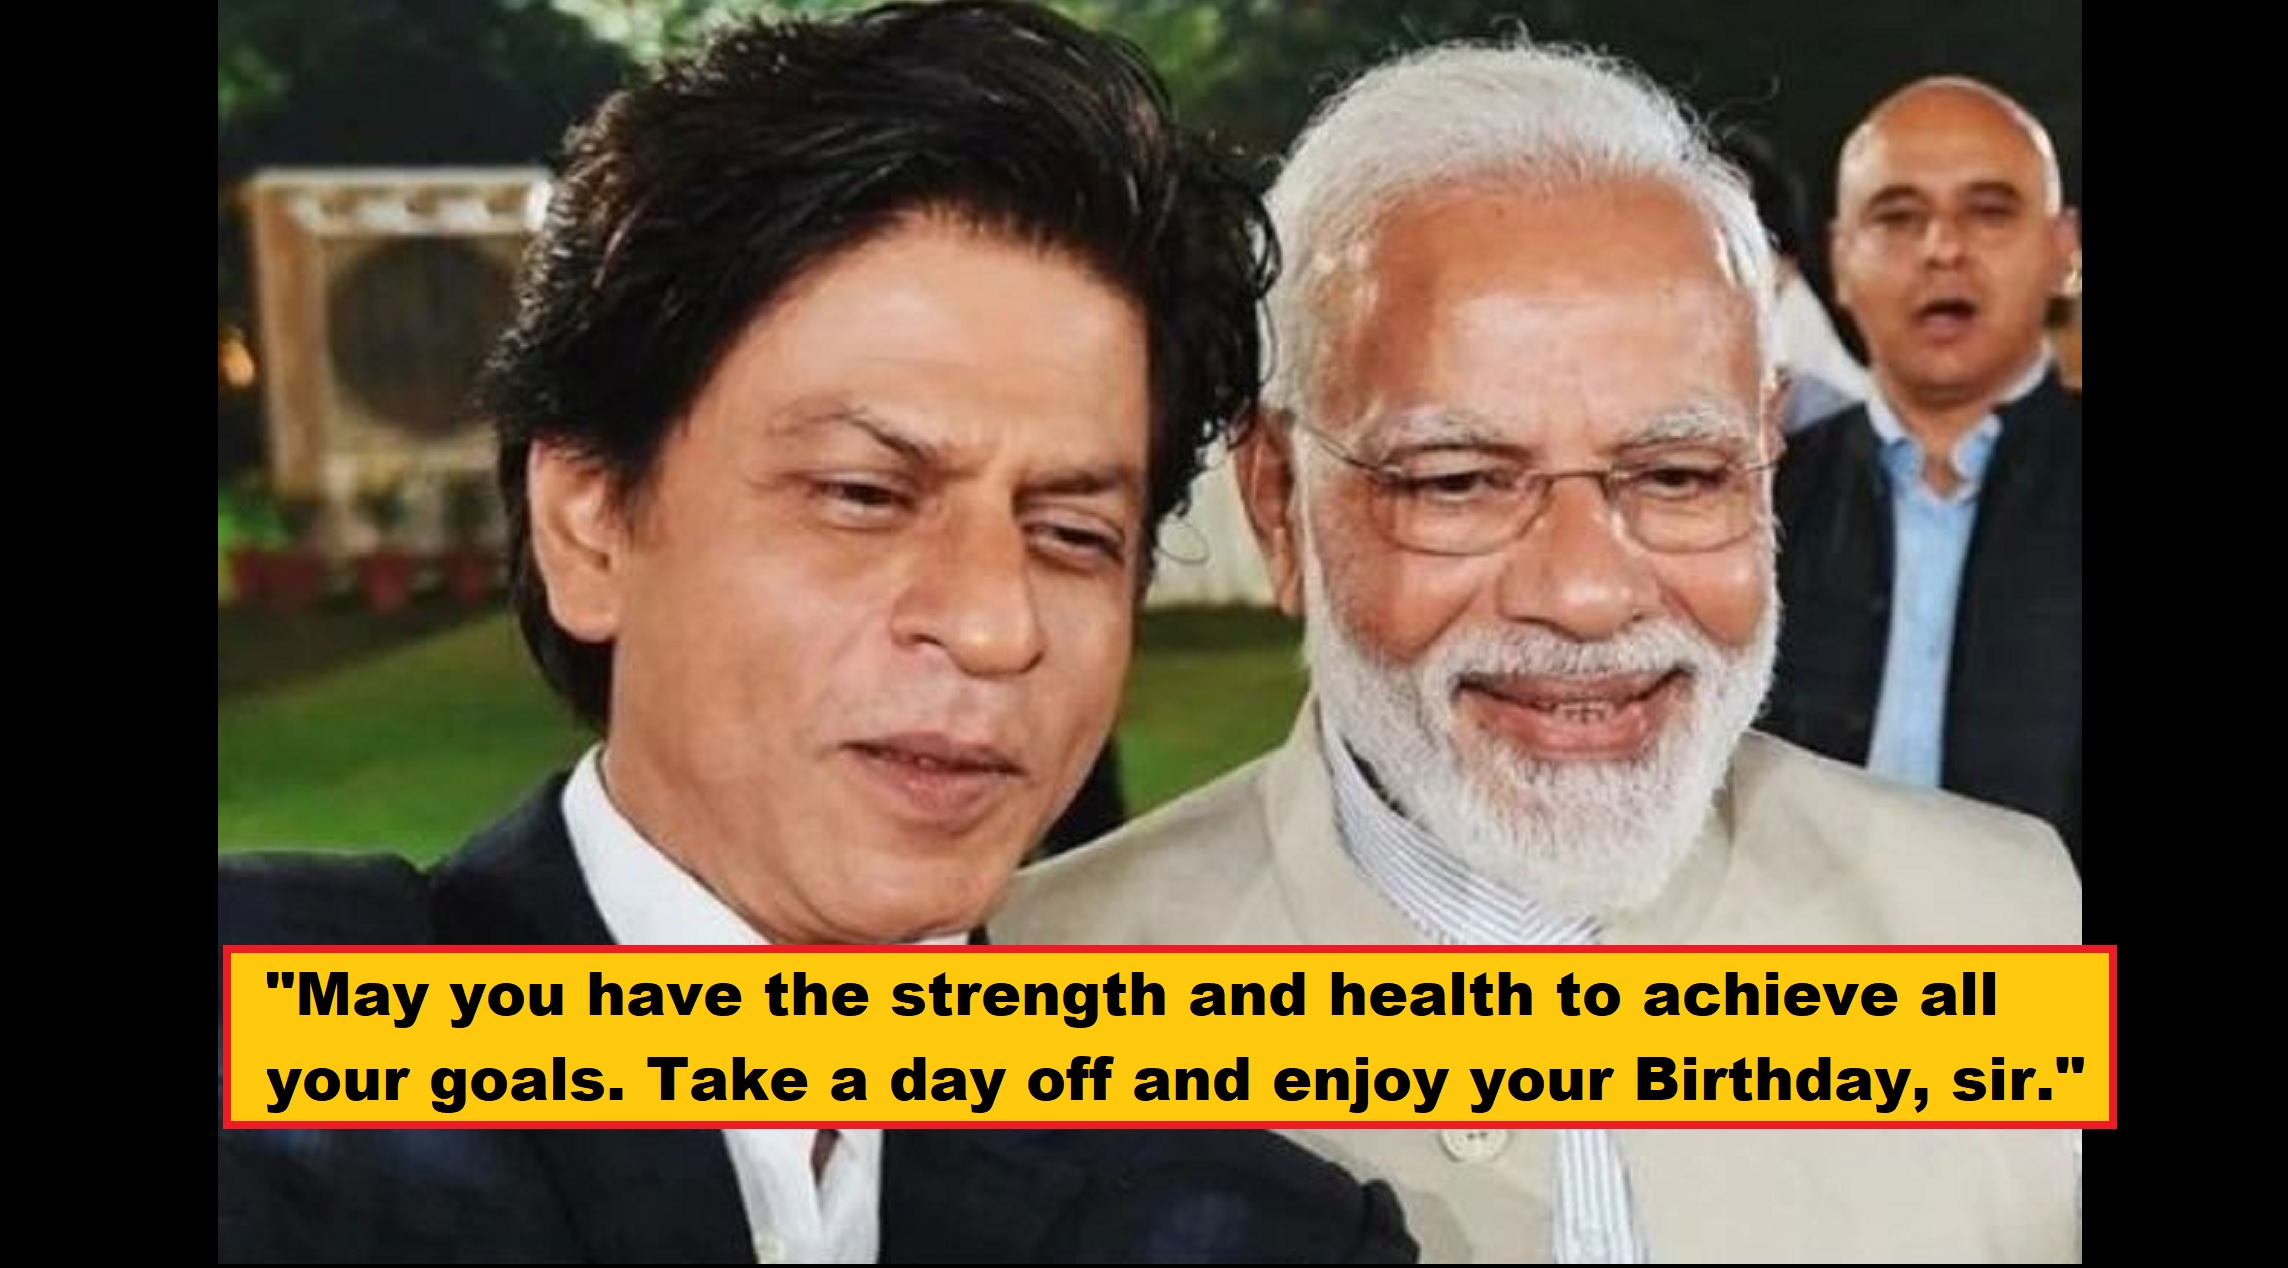 Shah Rukh Khan Wishes PM Modi On His B’day: “Your dedication for the welfare of our country and its people is highly appreciated”